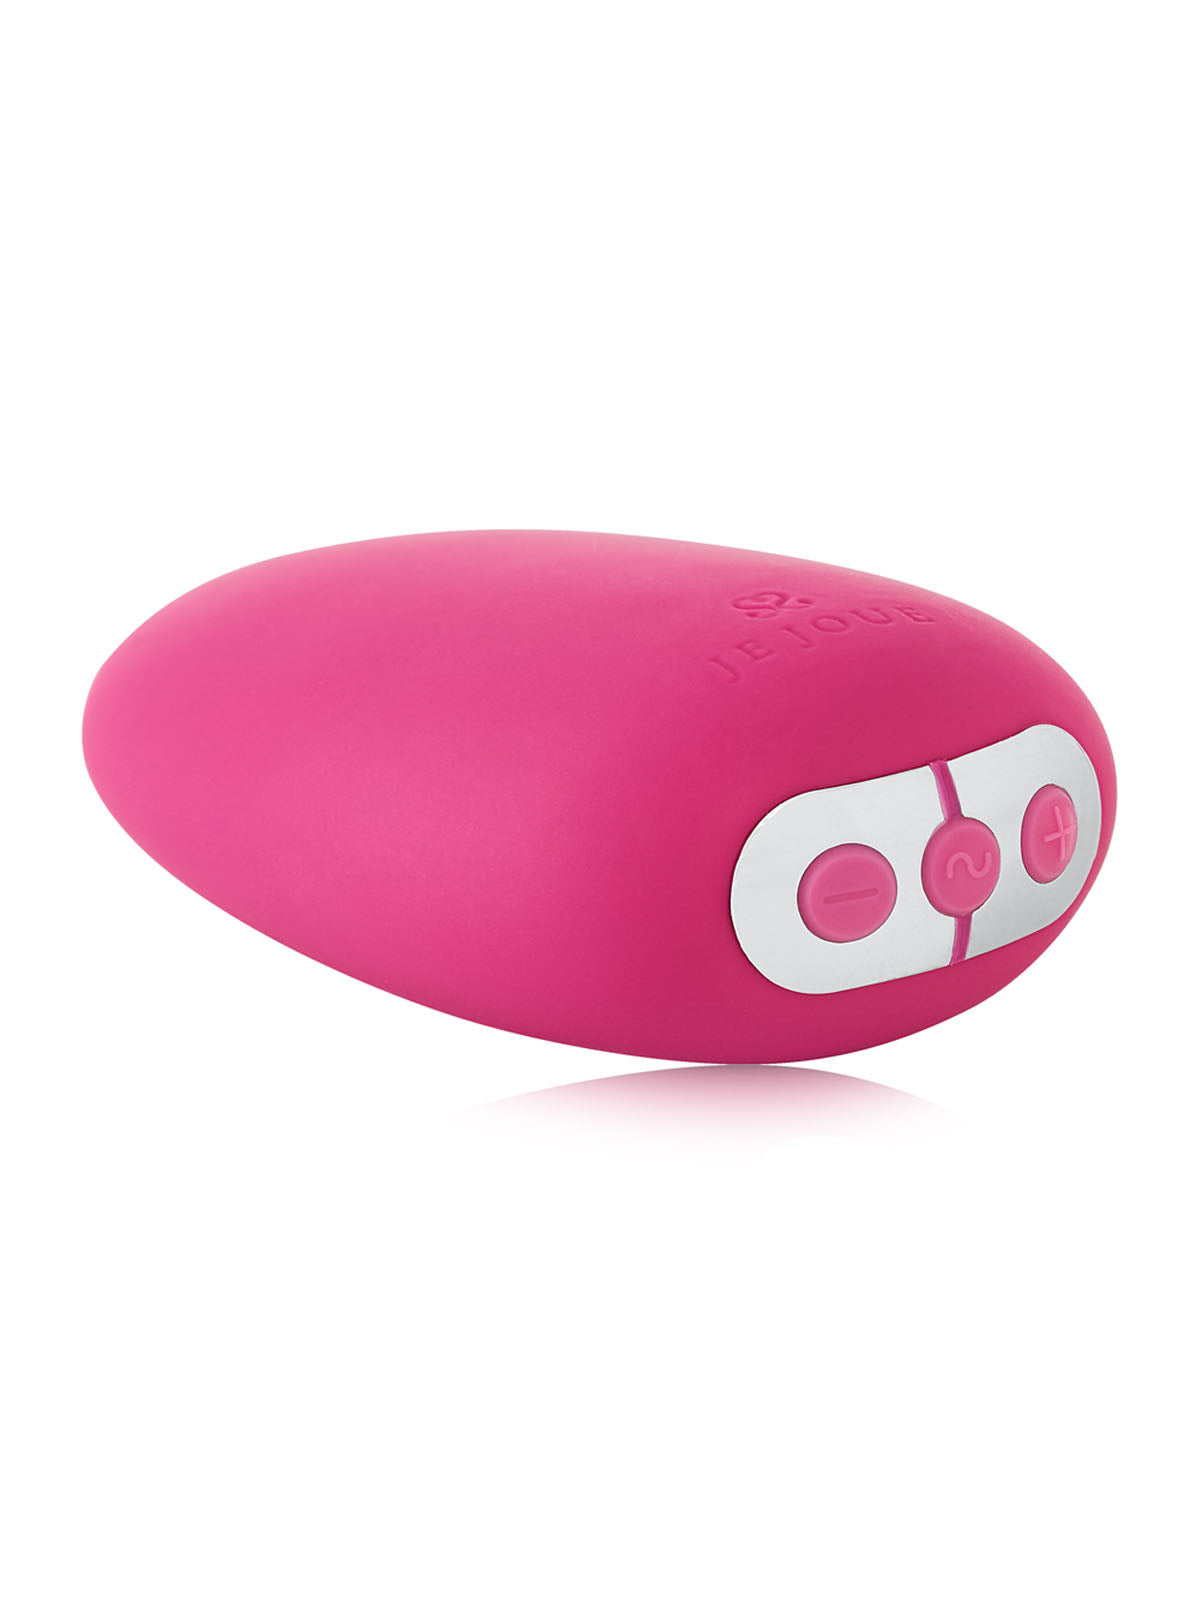 Pink Mimi Soft Clitoral Vibrator by JeJoue